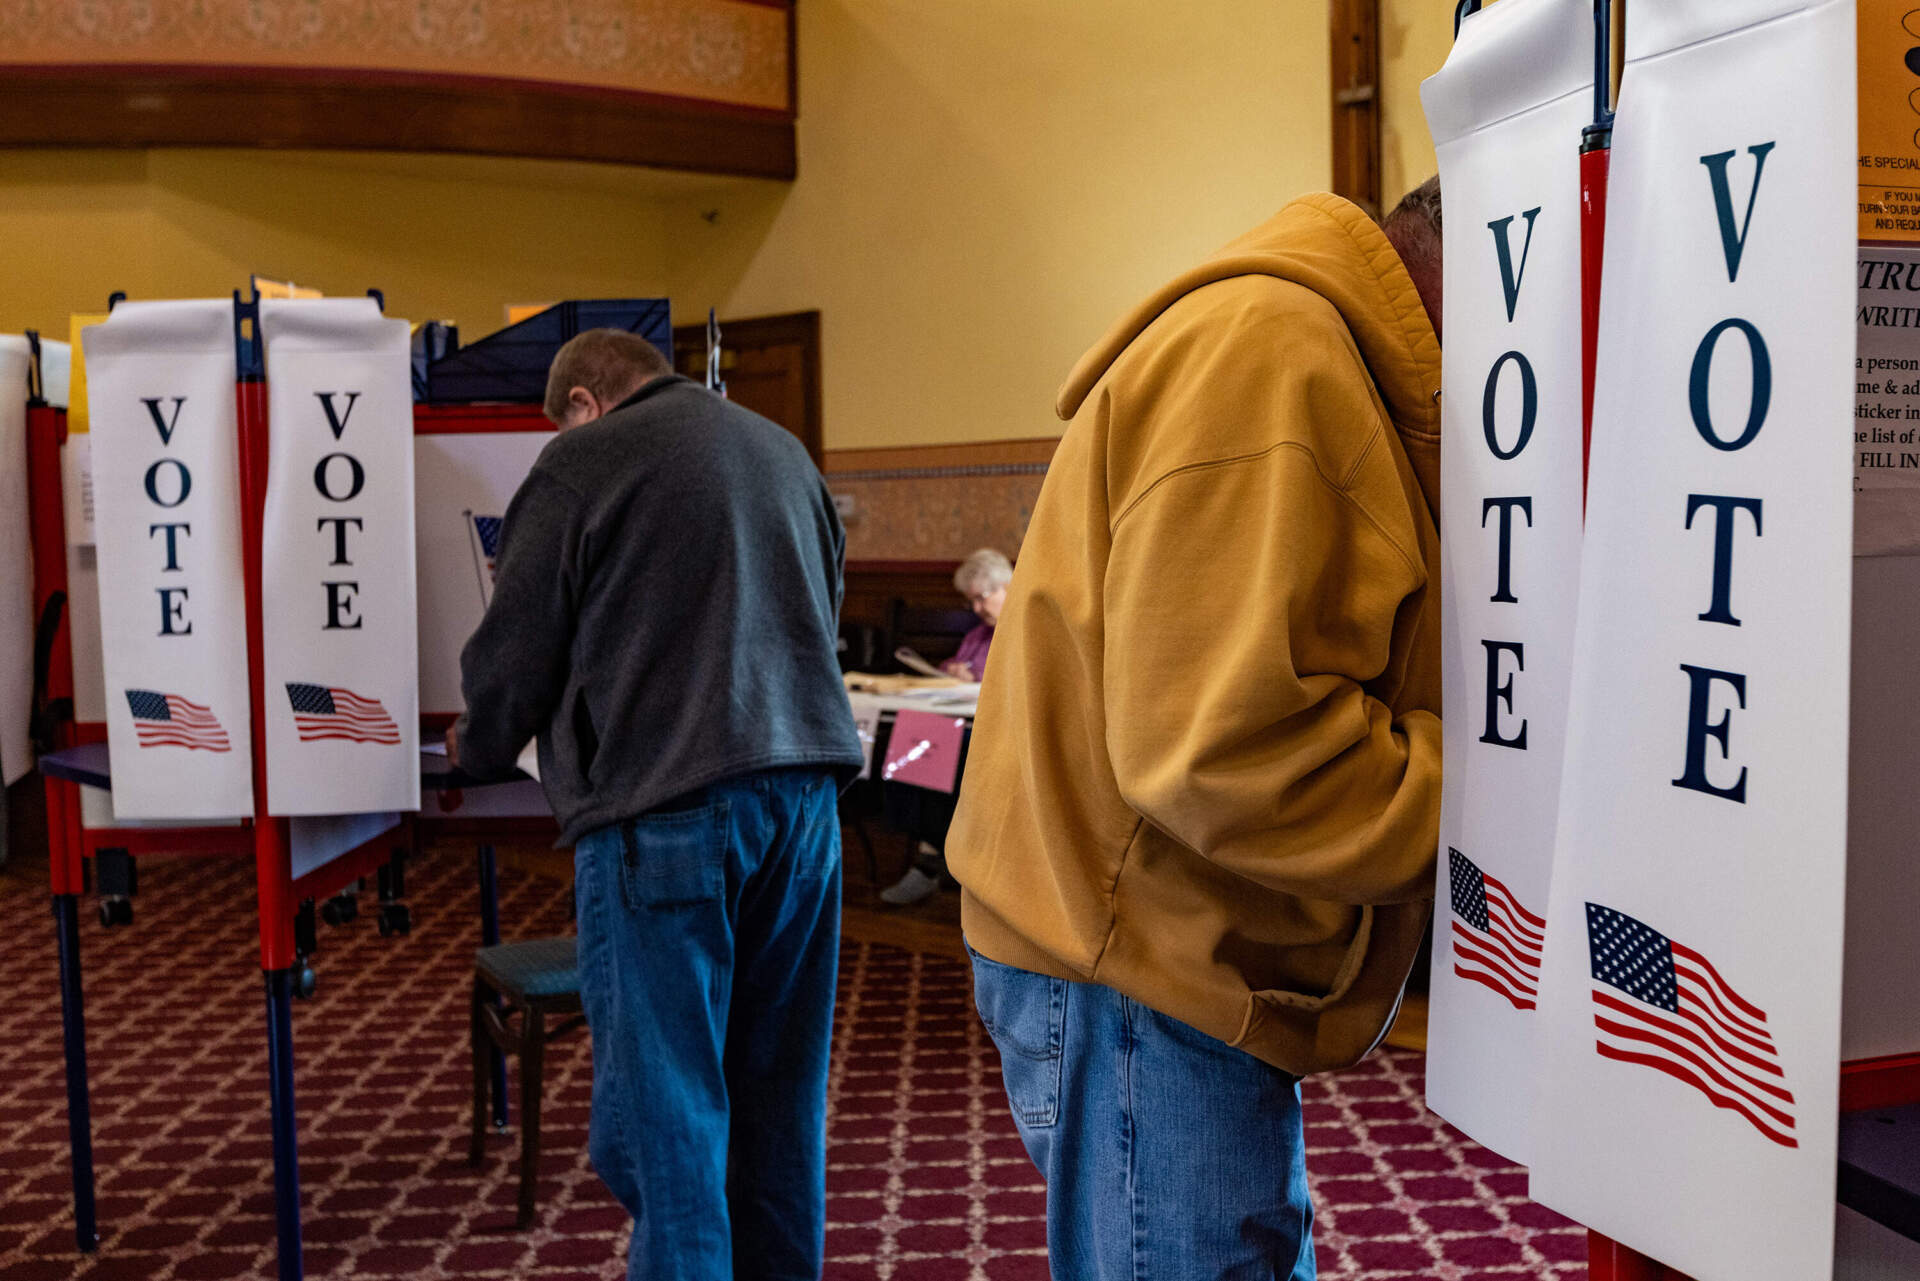 Voters at Memorial Hall in Townsend during the Massachusetts primary. (Jesse Costa/WBUR)